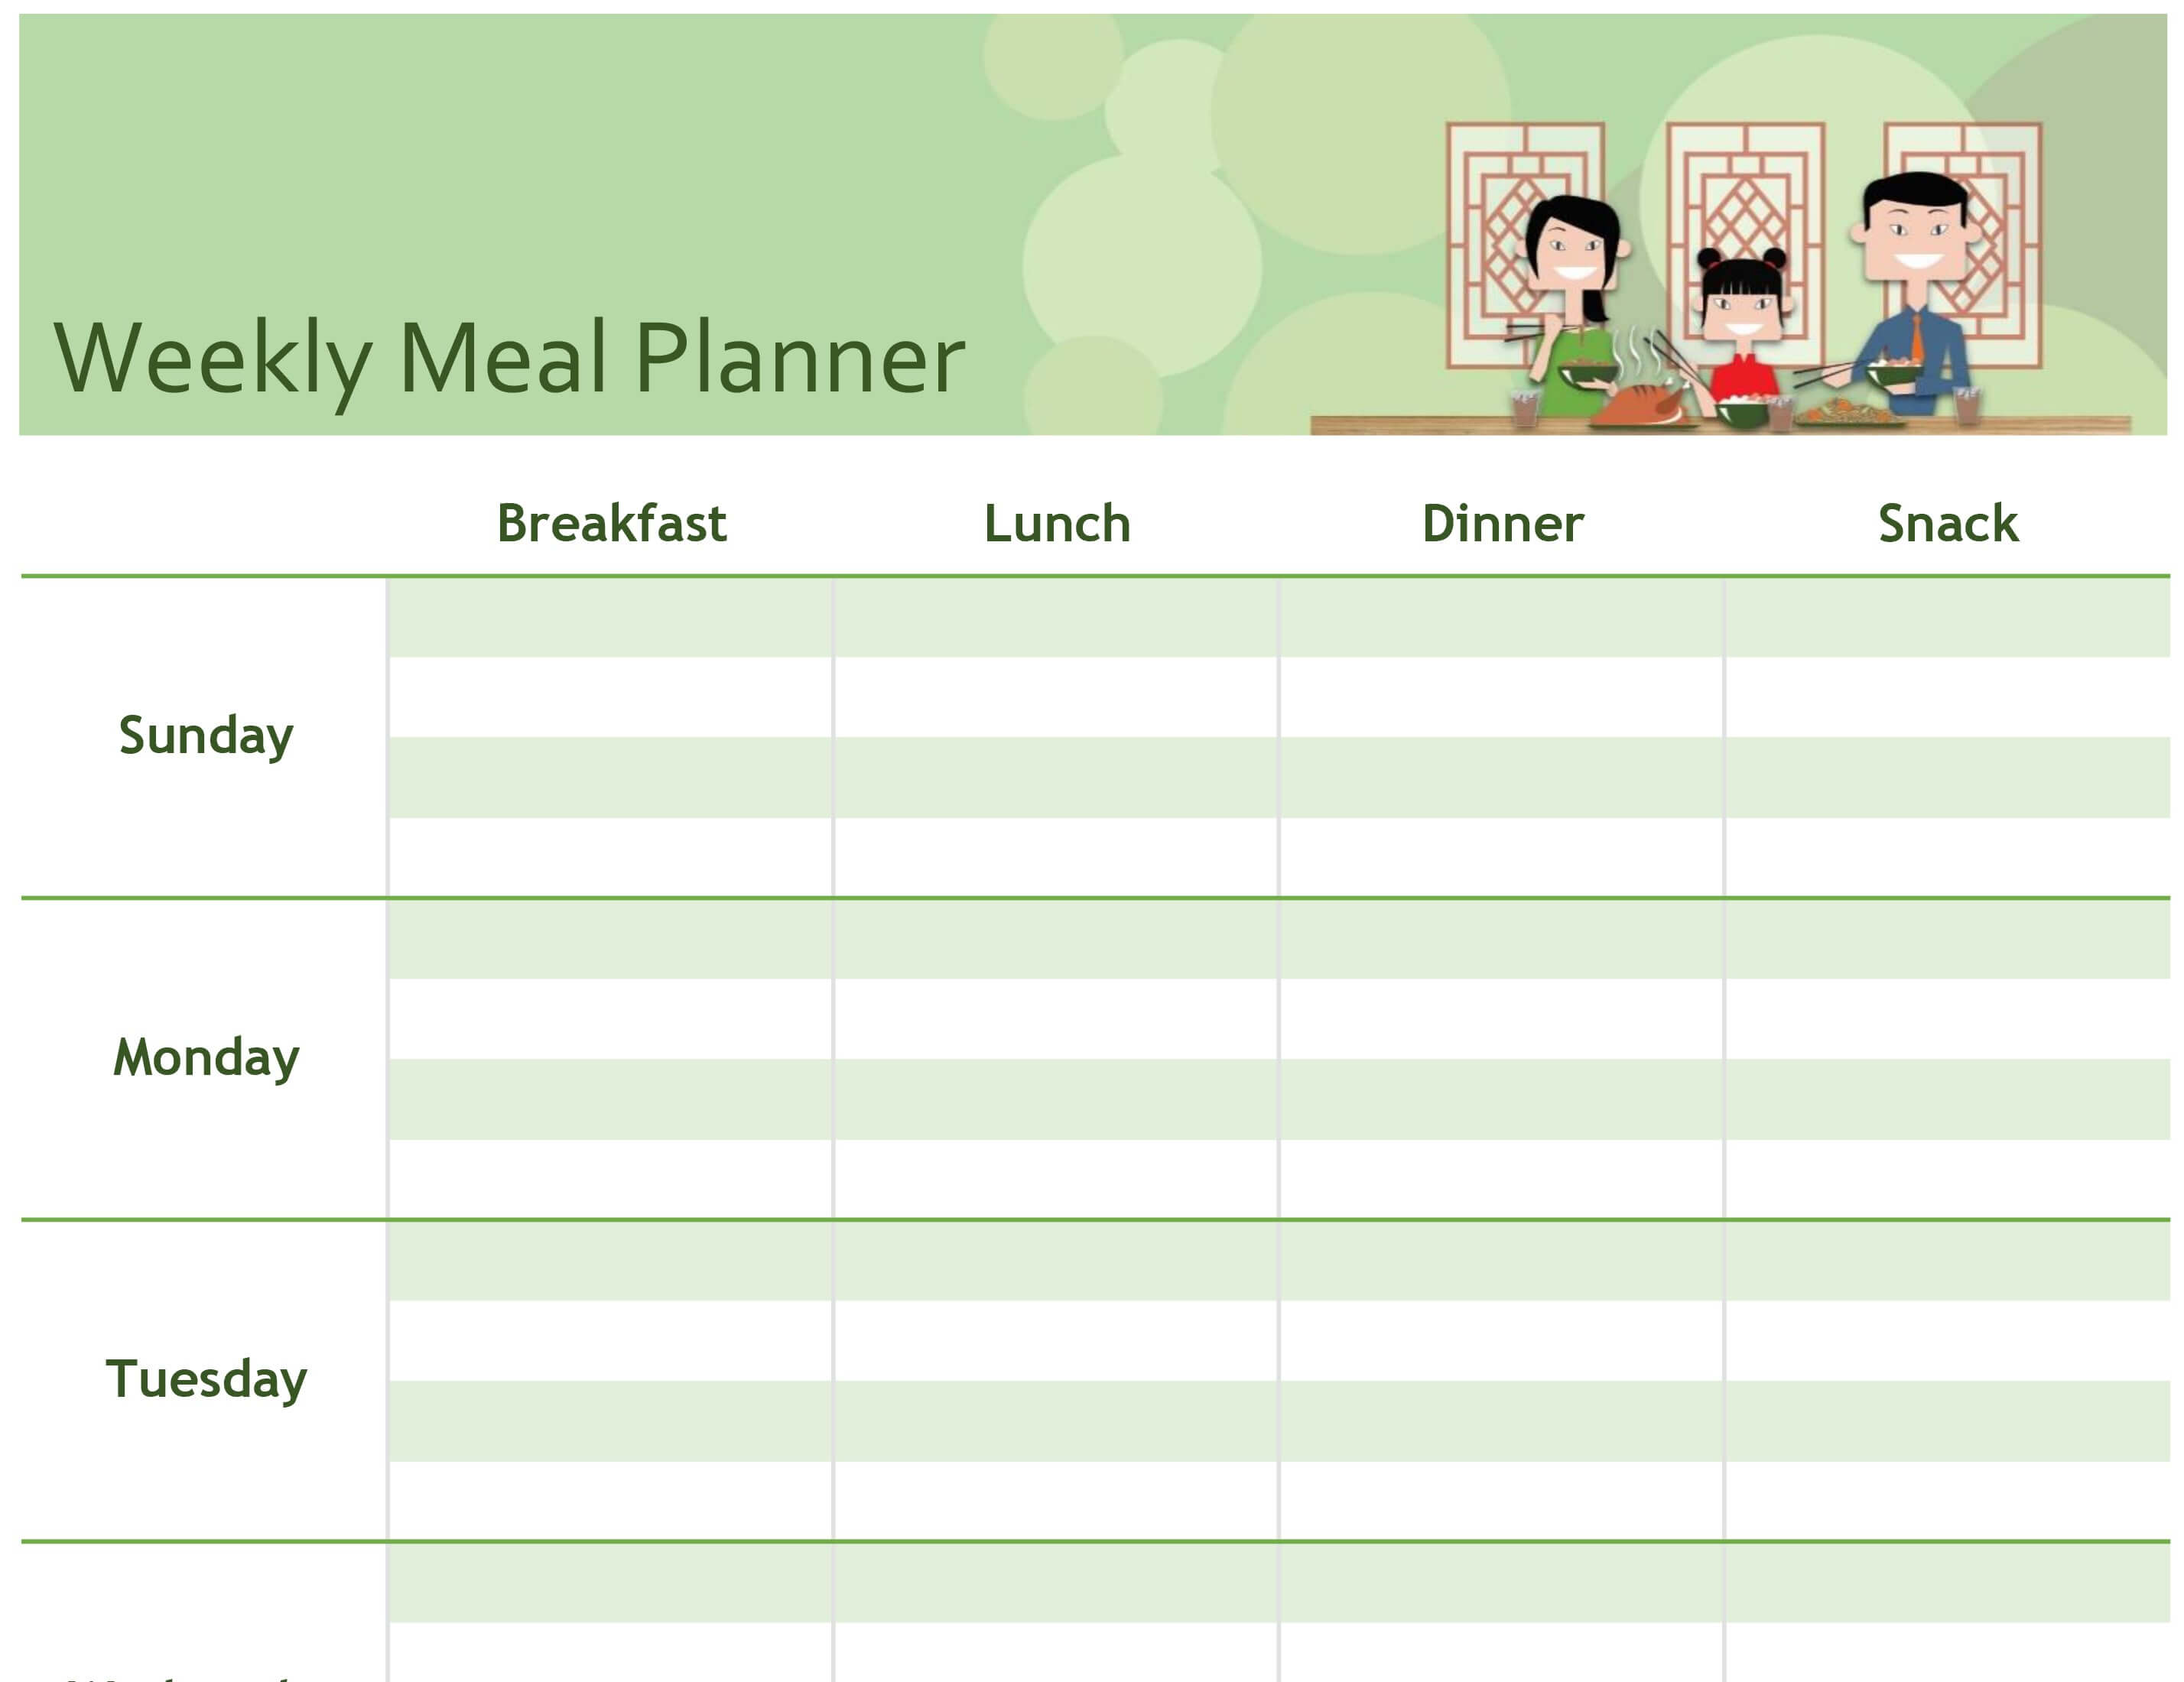 003 Image Template Ideas Free Weekly Meal Fascinating Within Weekly Meal Planner Template Word